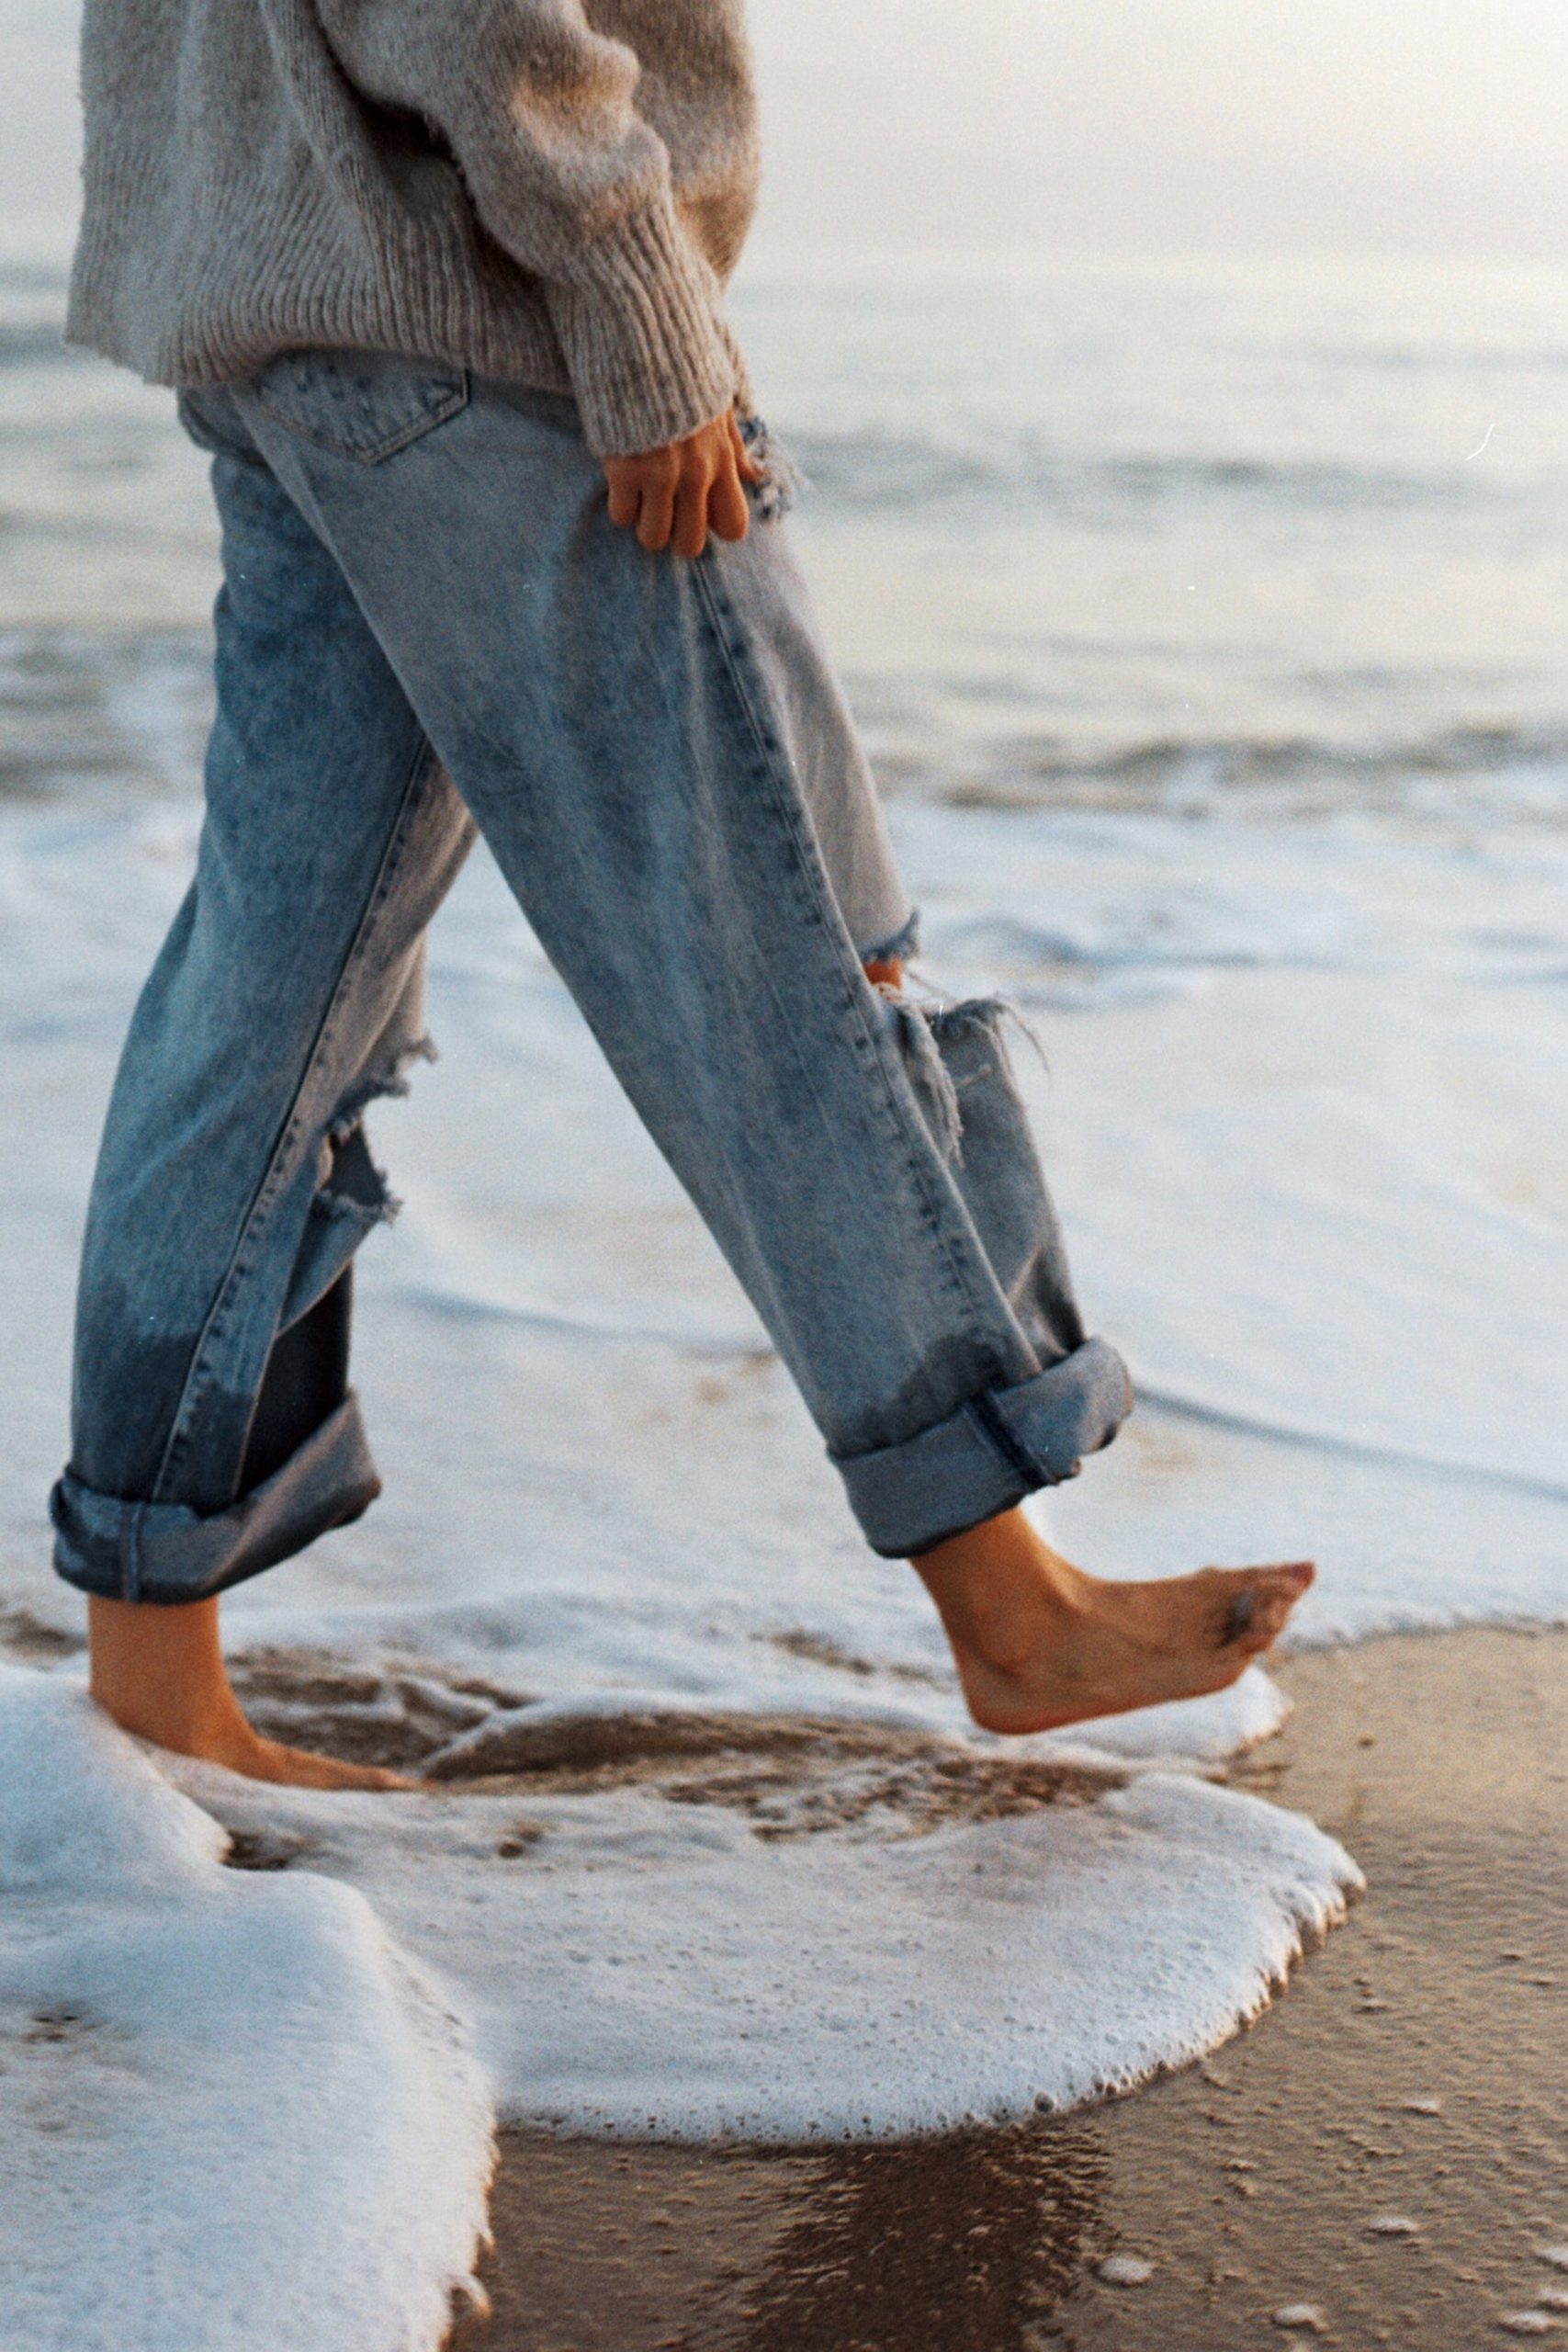 Walking away from a job barefoot in the sand